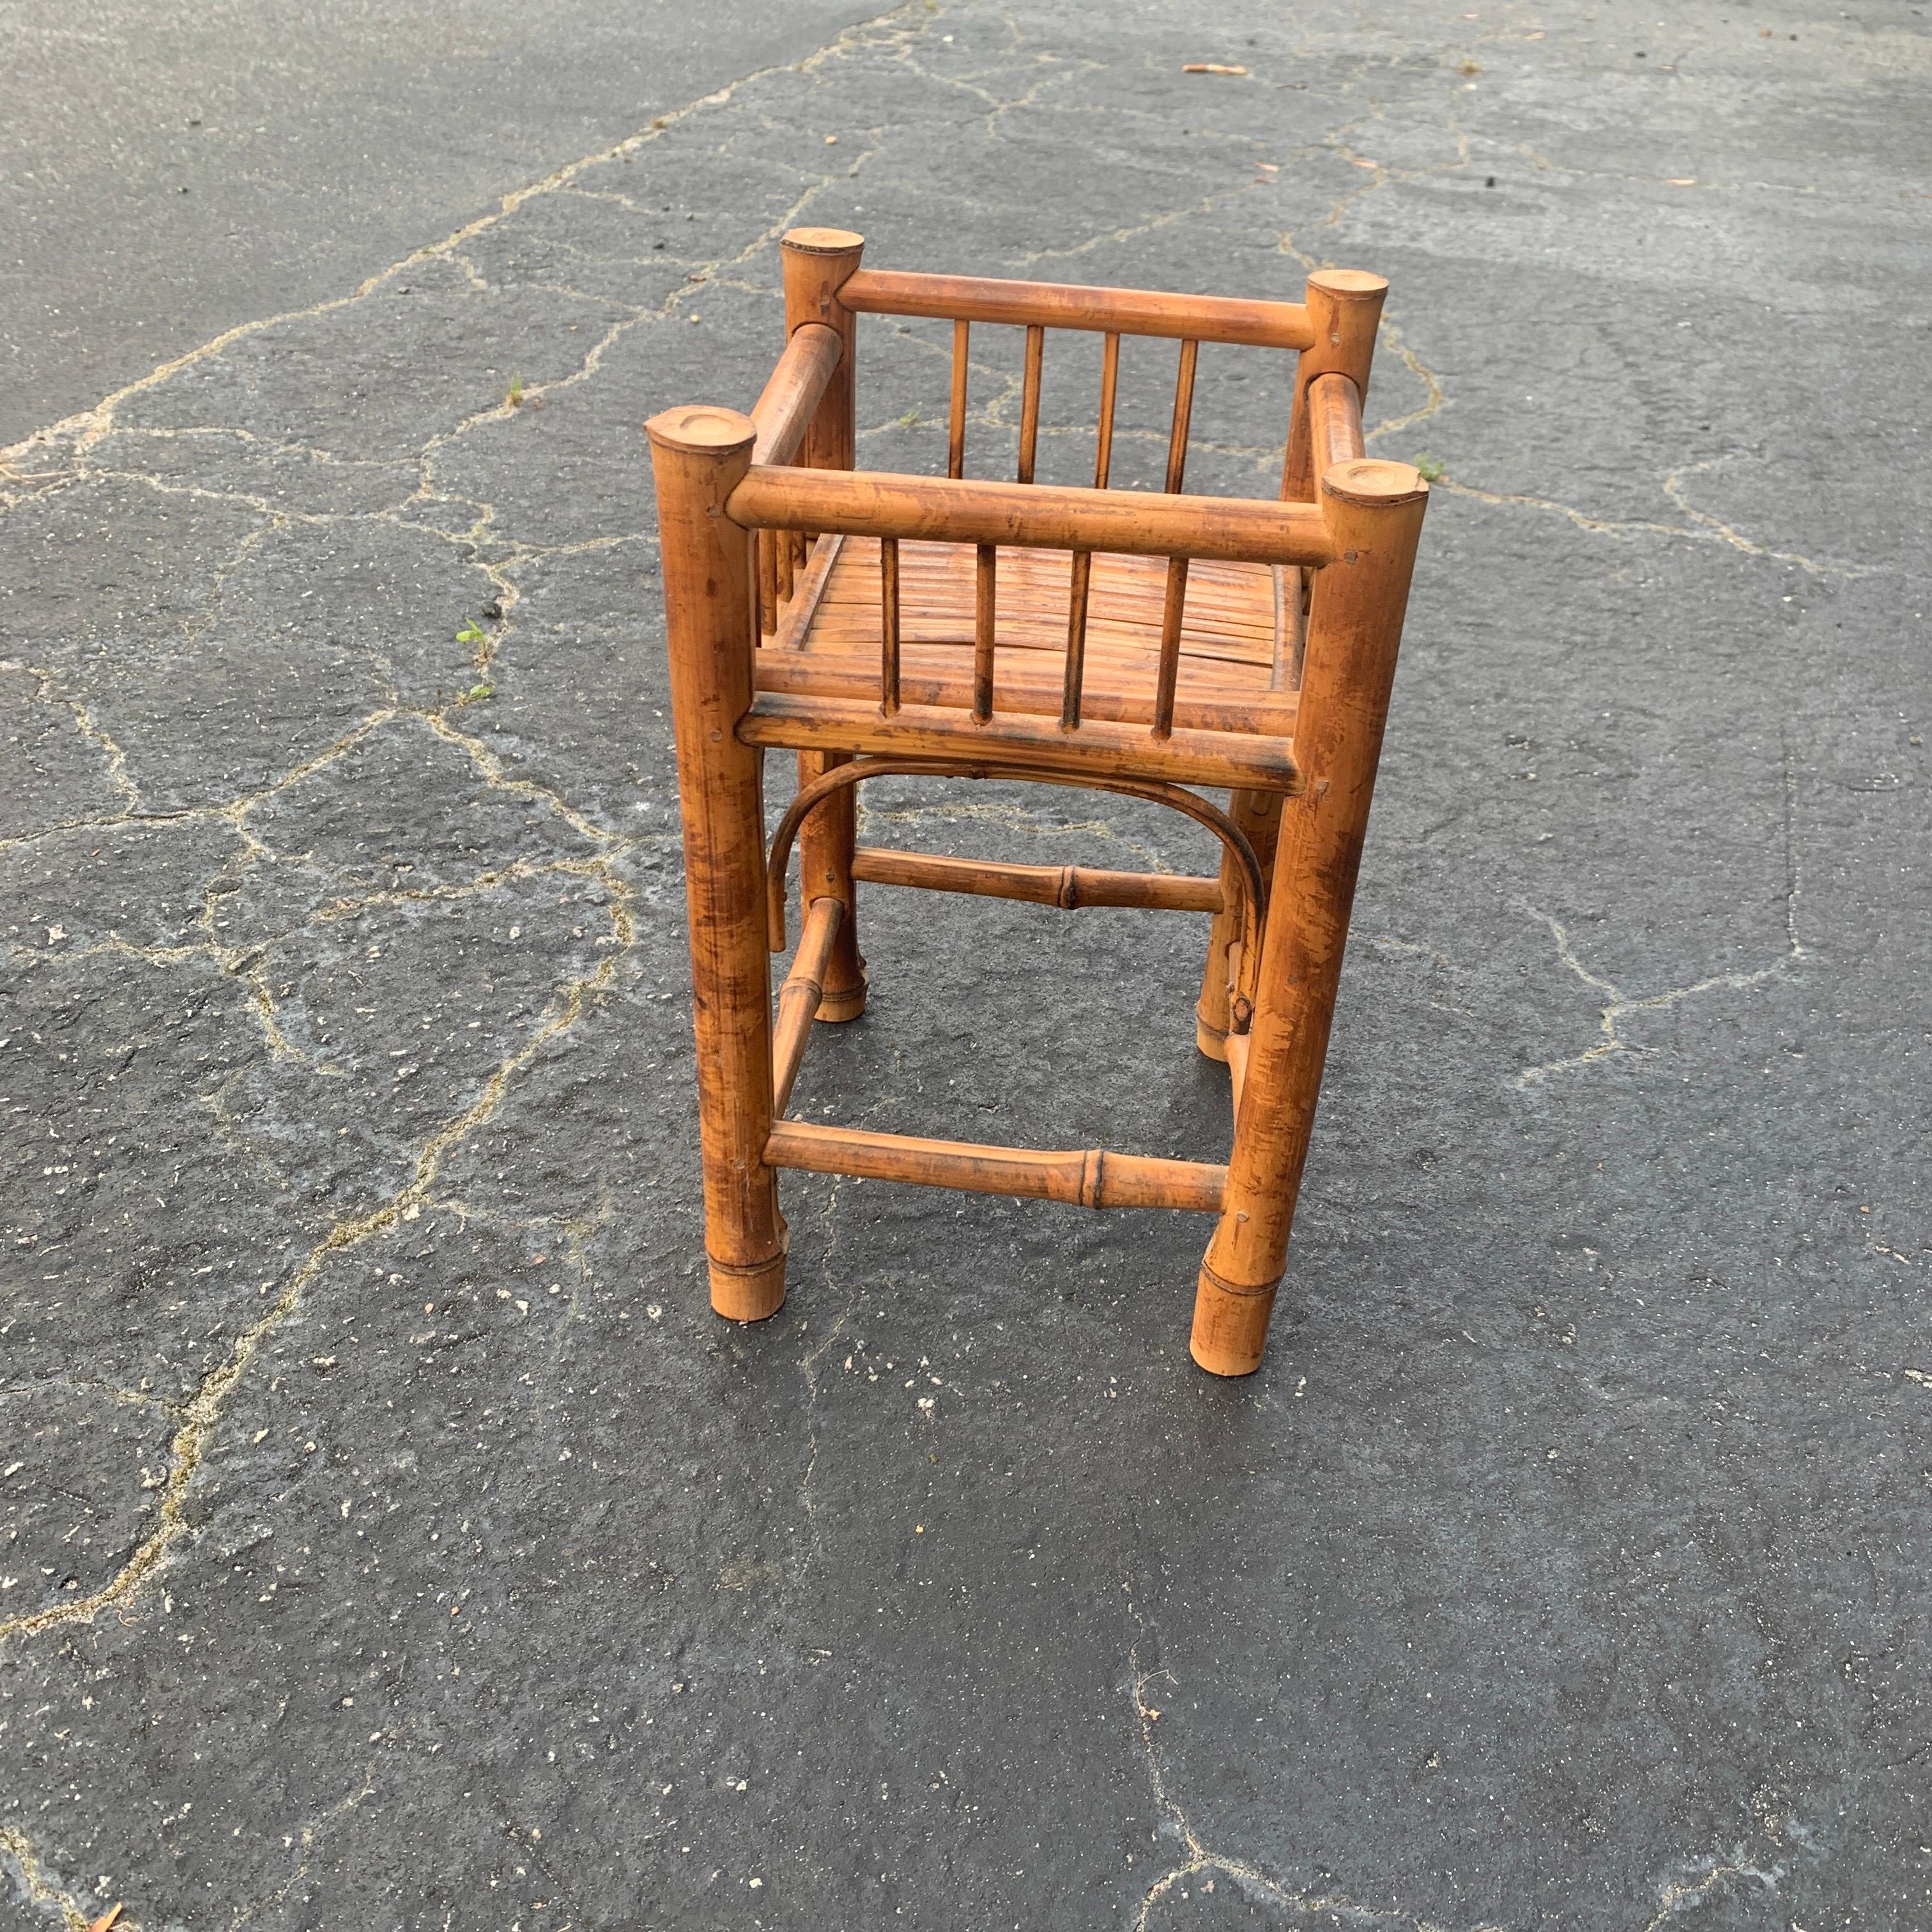 1970s Boho chic handcrafted rattan planter in great shape. The planter of your choosing rests inside of the stand. This helps to protect it from being knocked over and breaking. The depression measures 3 inches deep by 7 inches wide and long.